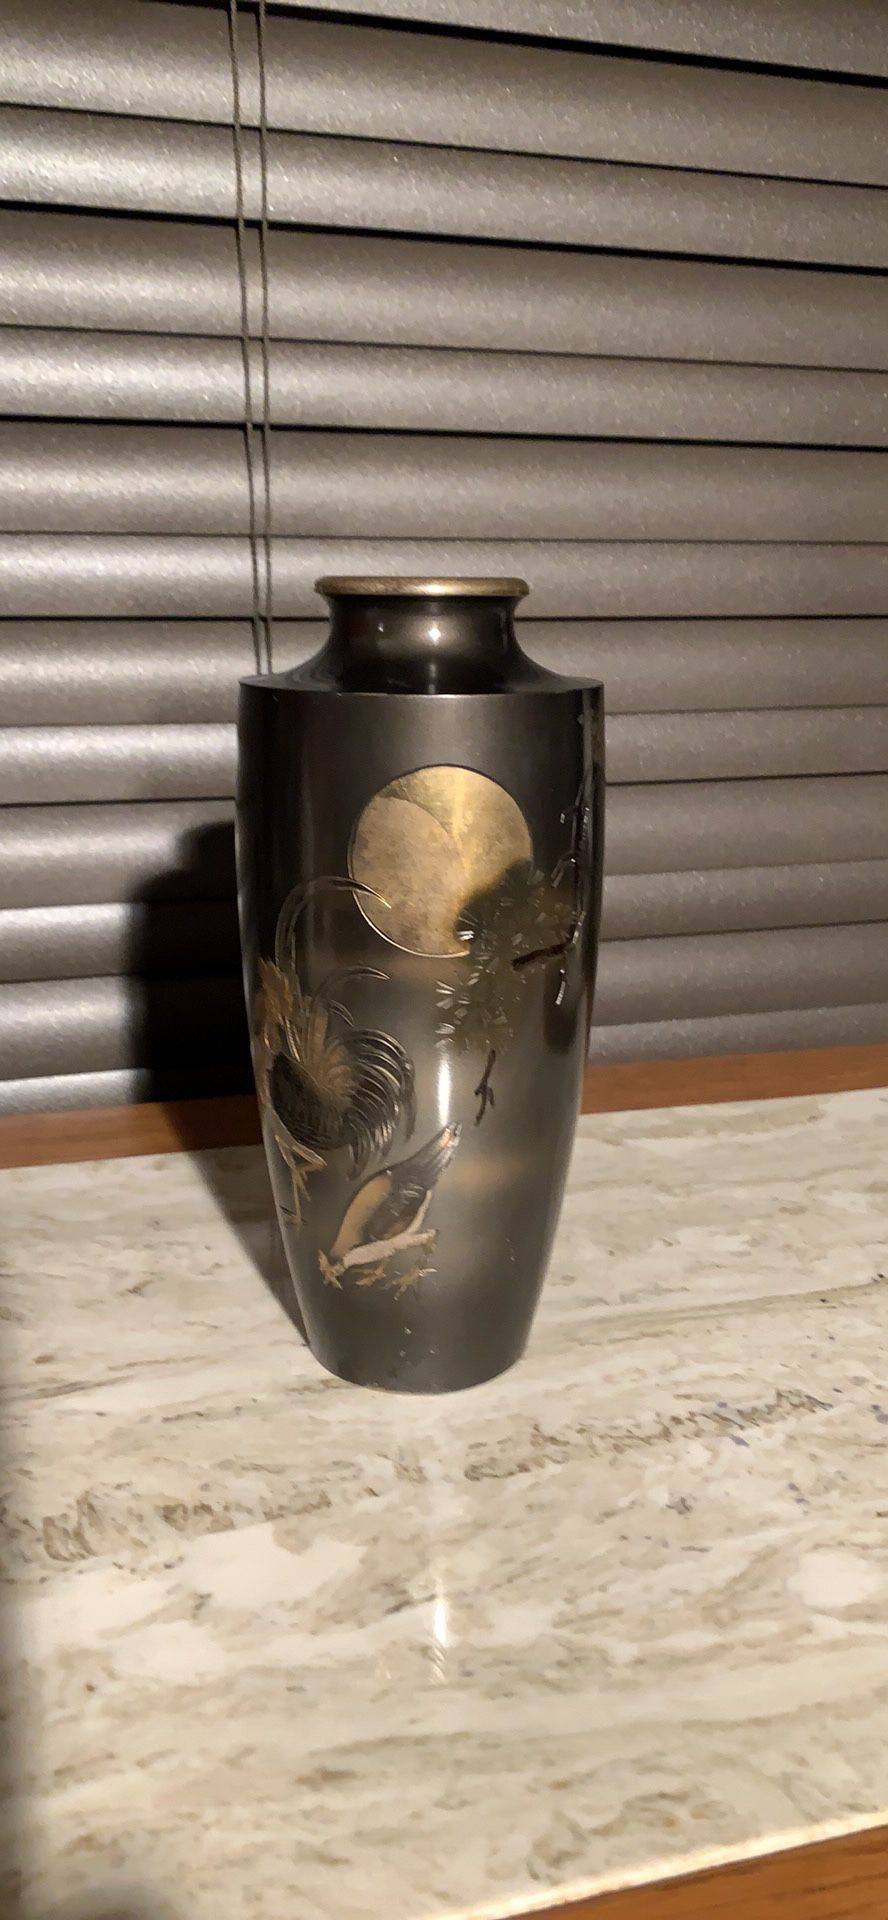 Metal Etched Vase With Several Inlaid Types Of A Moonlit Design